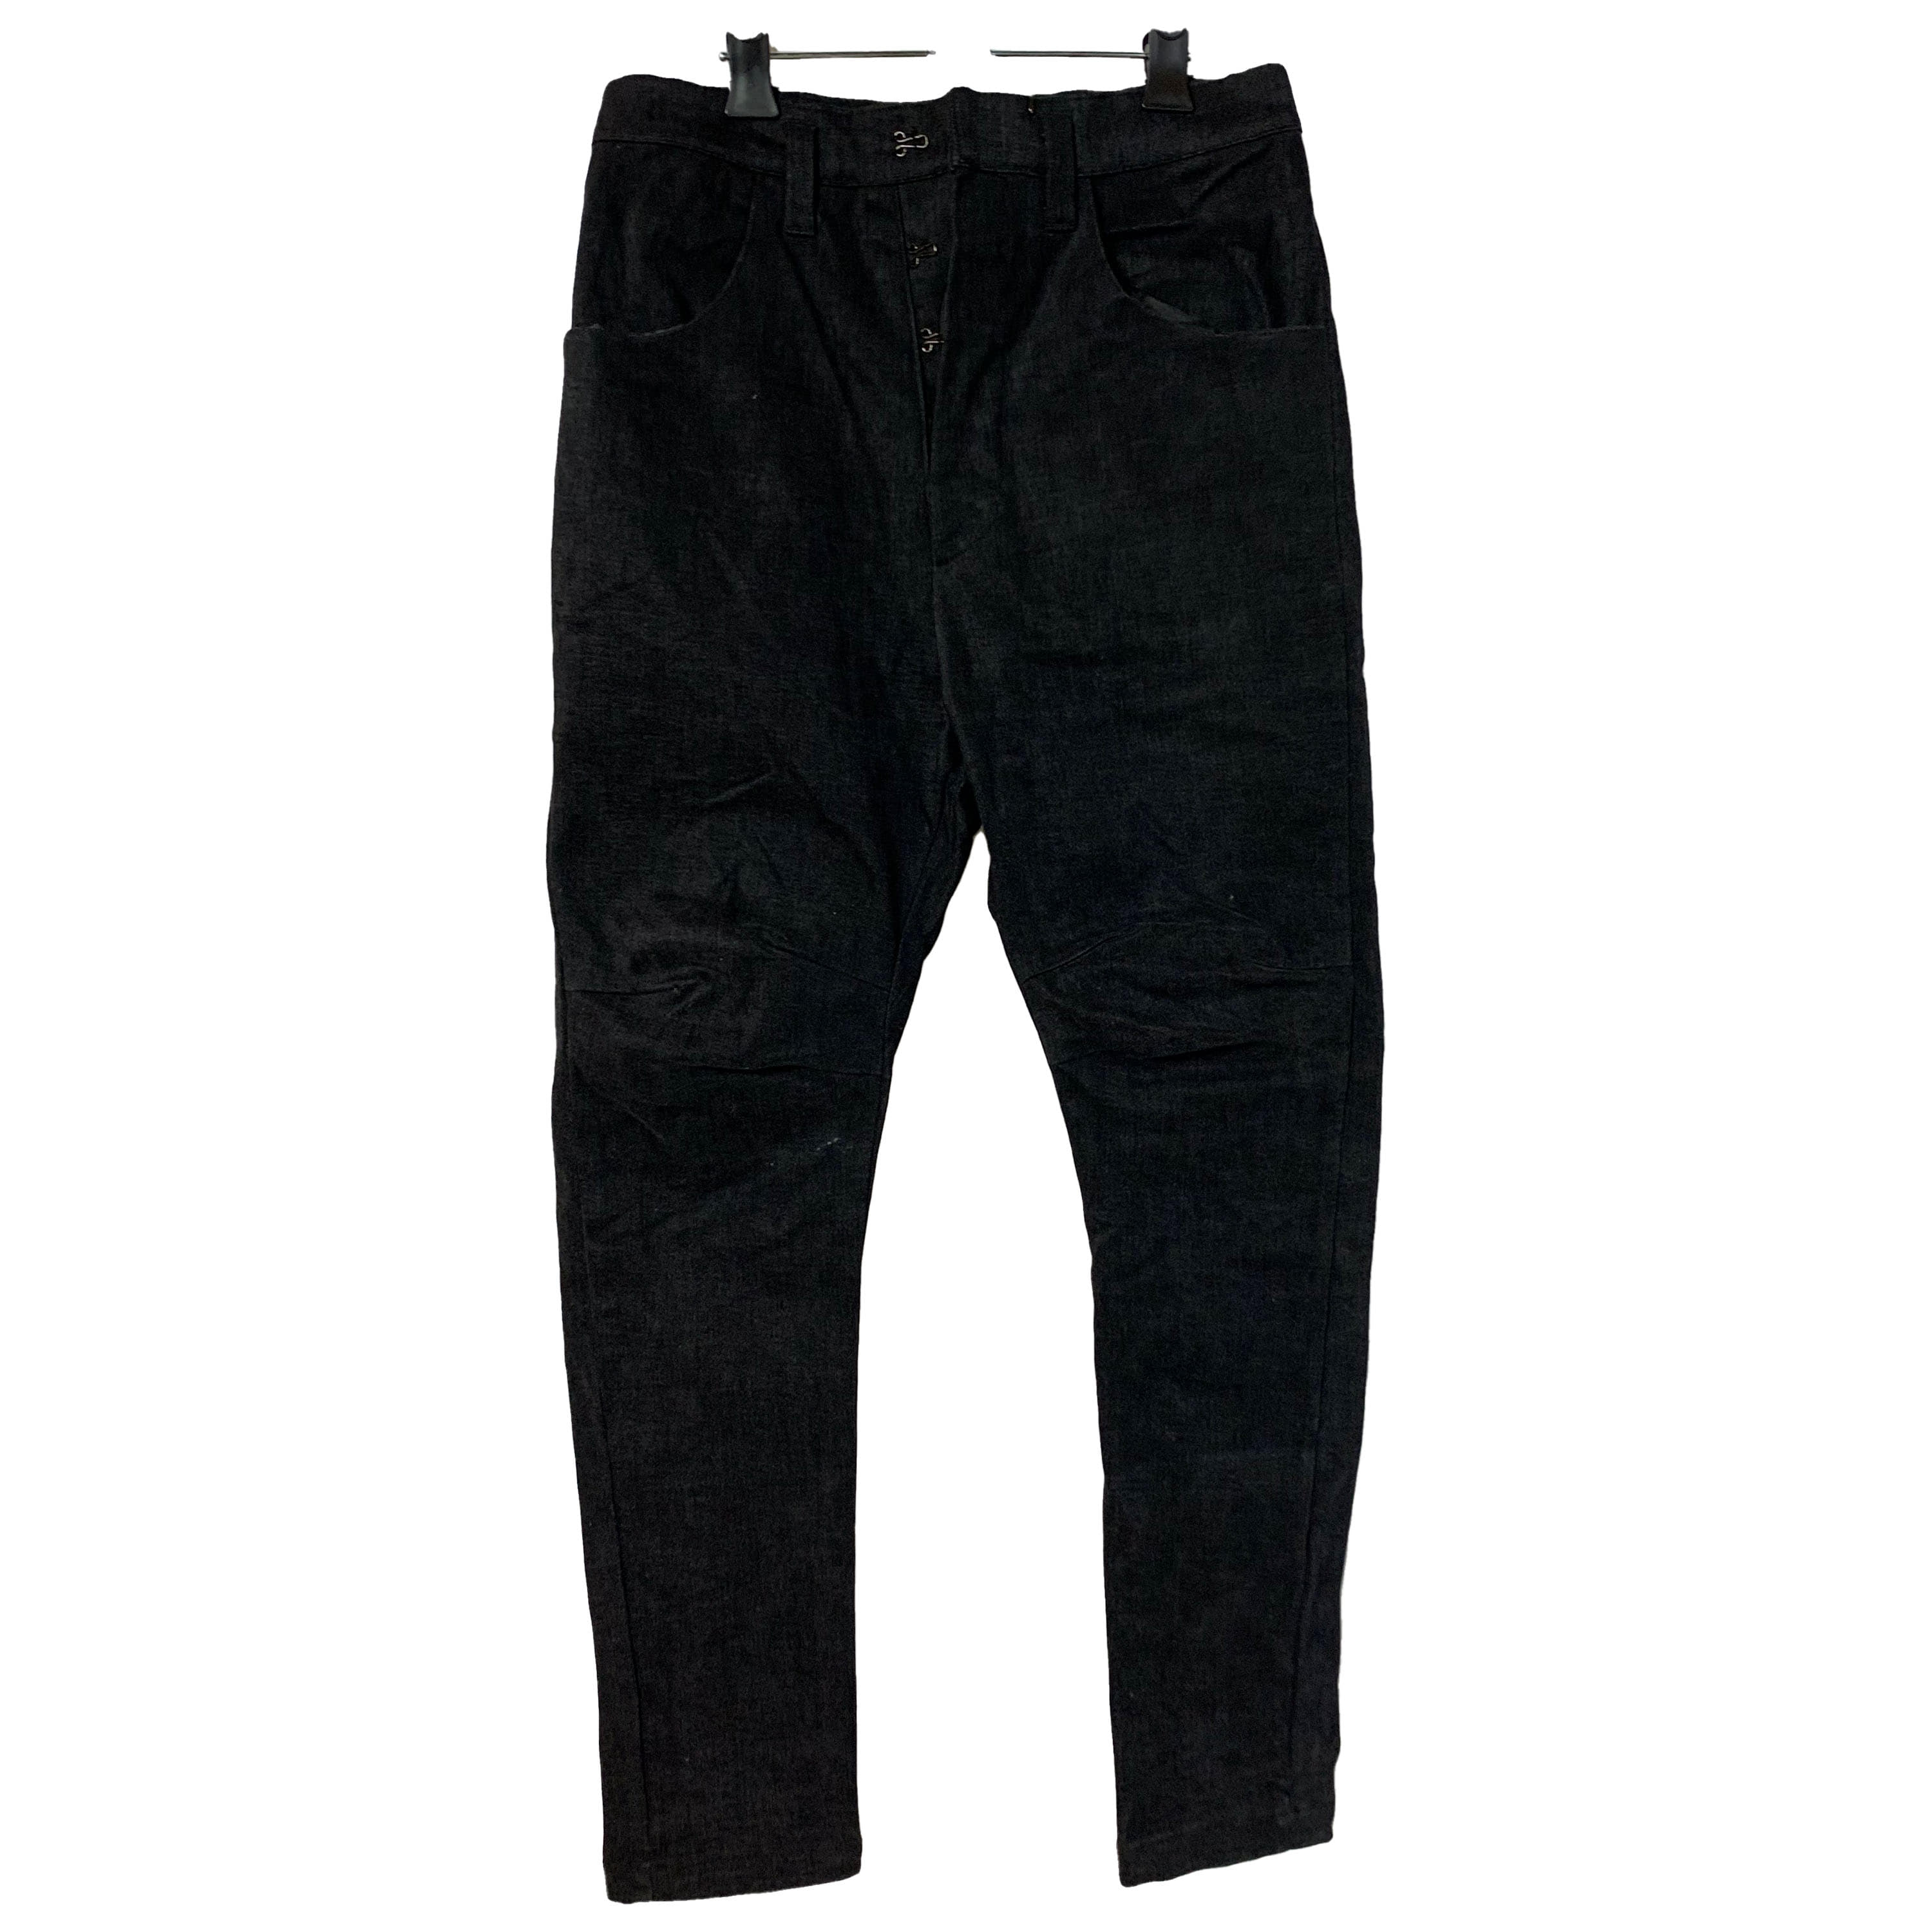 [Baroque] Washed Drop Crotch Jeans - Size 1